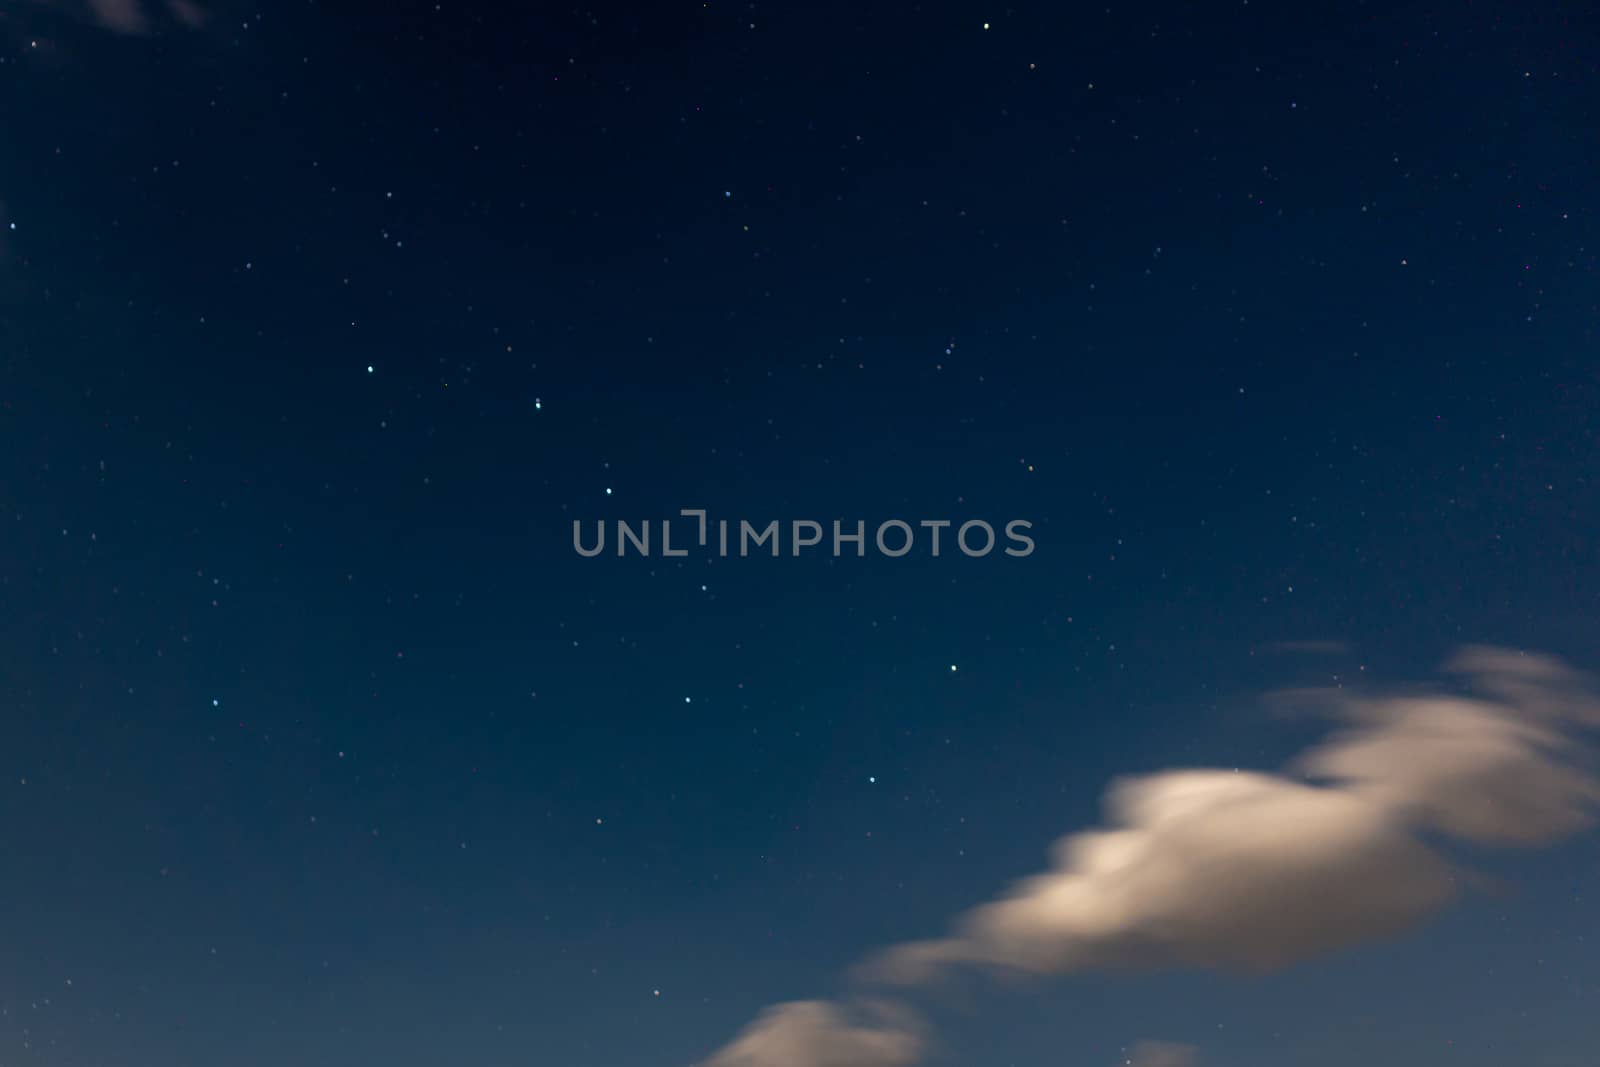 Ursa Major constellation in night sky with clouds by asafaric